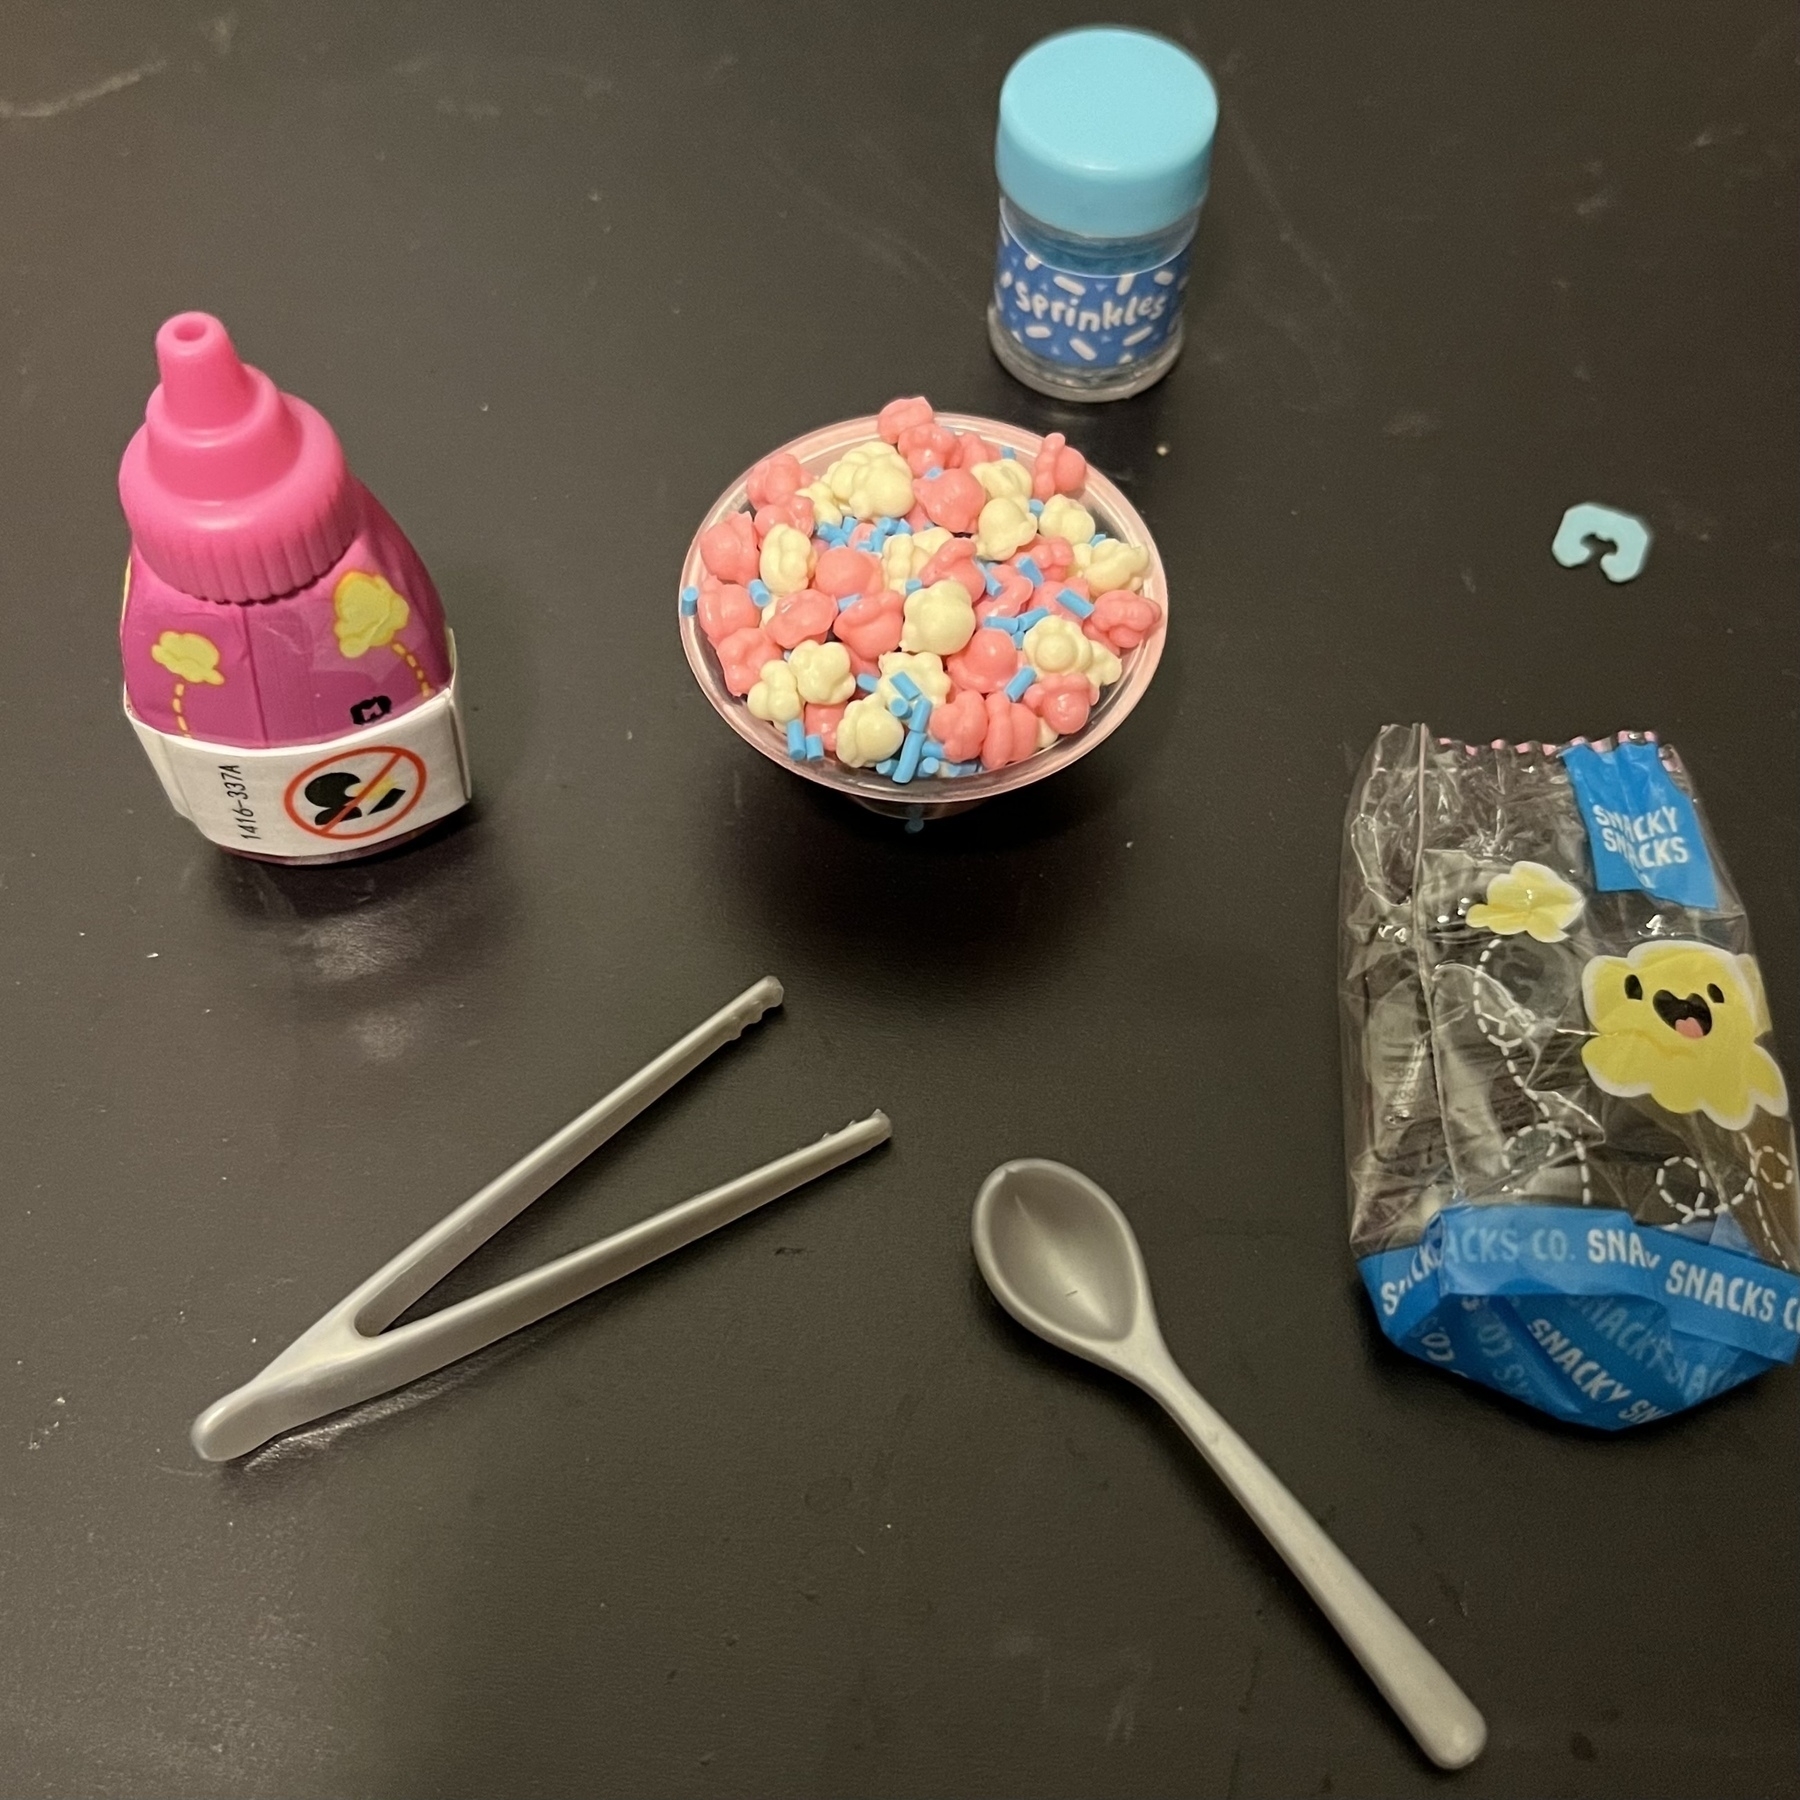 Tiny bowl of plastic popcorn with tweezers, a tiny spoon, popcorn bag and a bottle of resin. 